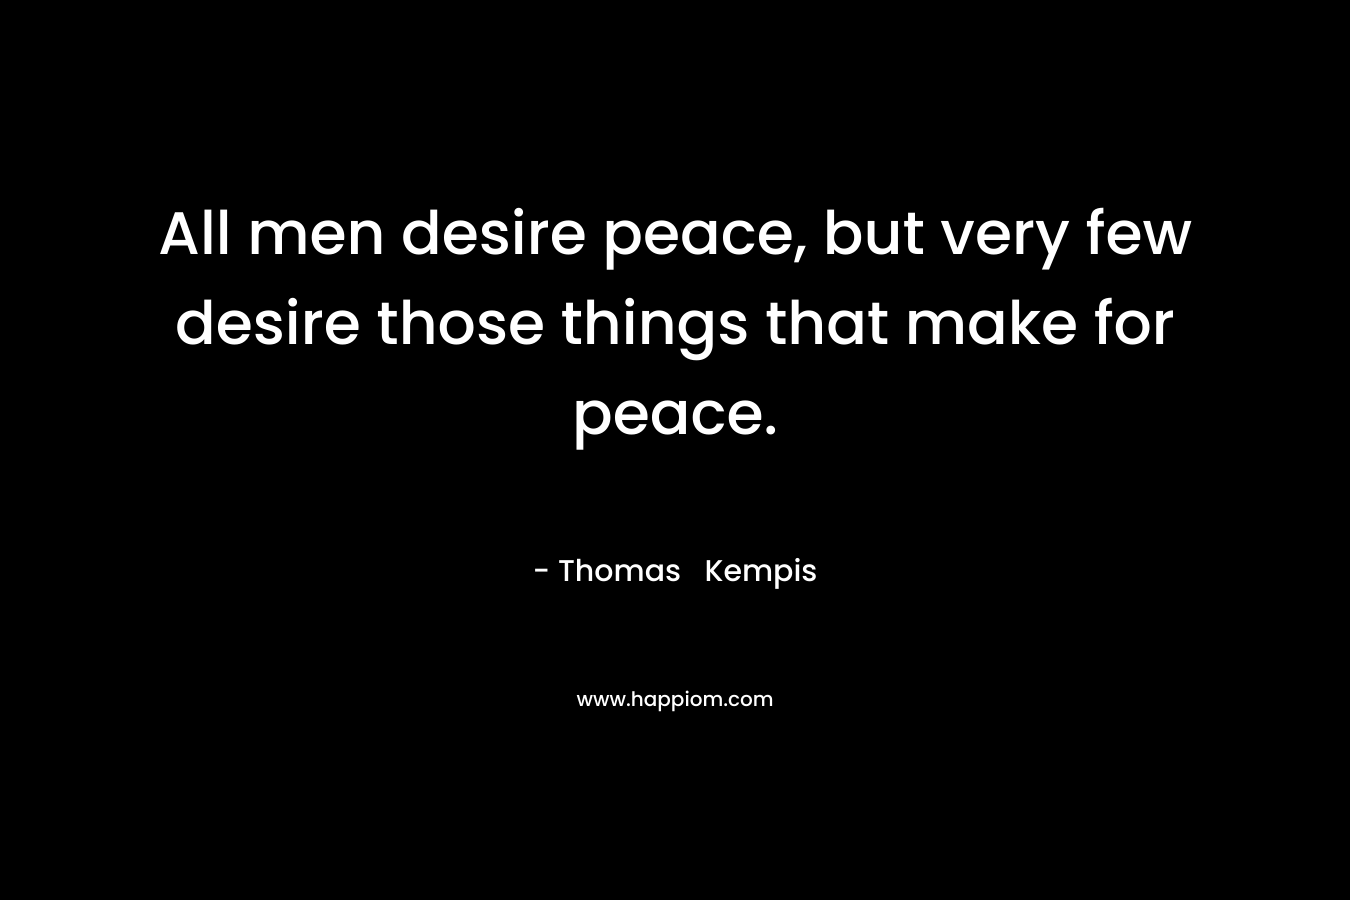 All men desire peace, but very few desire those things that make for peace.